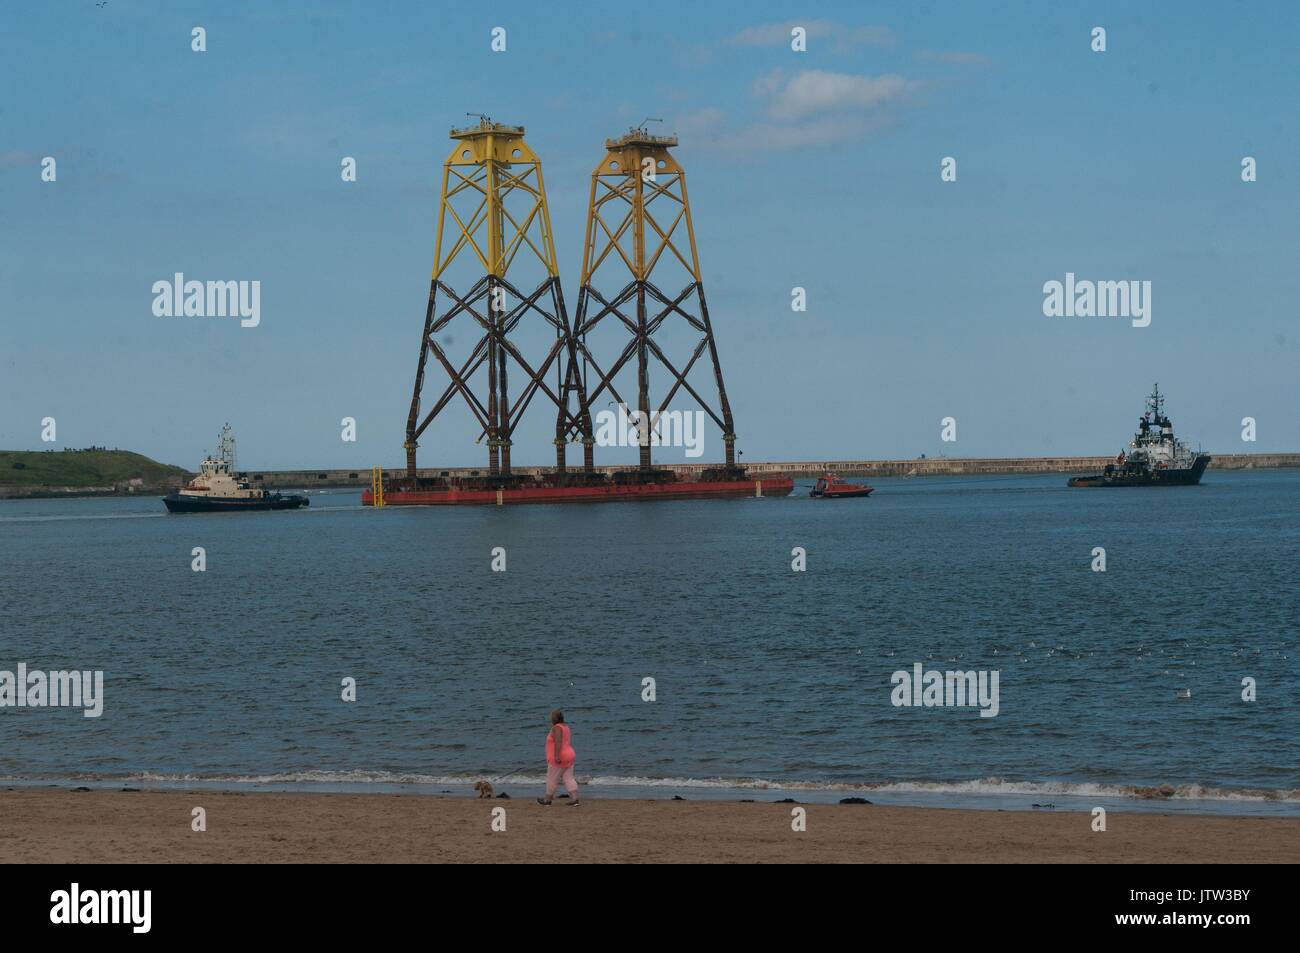 River Tyne, South Shields, UK, 10th August 2017. Wind turbine foundations being towed at the mouth of the River Tyne on their way to the Beatrice offshore wind farm in the Moray Firth. Due to their height National Grid had to raise the height of power cables across the River Tyne despite the pylons being two of the highest in Britain, surpassed only by sets spanning the River Thames near London and the River Severn in Bristol. Credit: Colin Edwards/Alamy Live News. Stock Photo